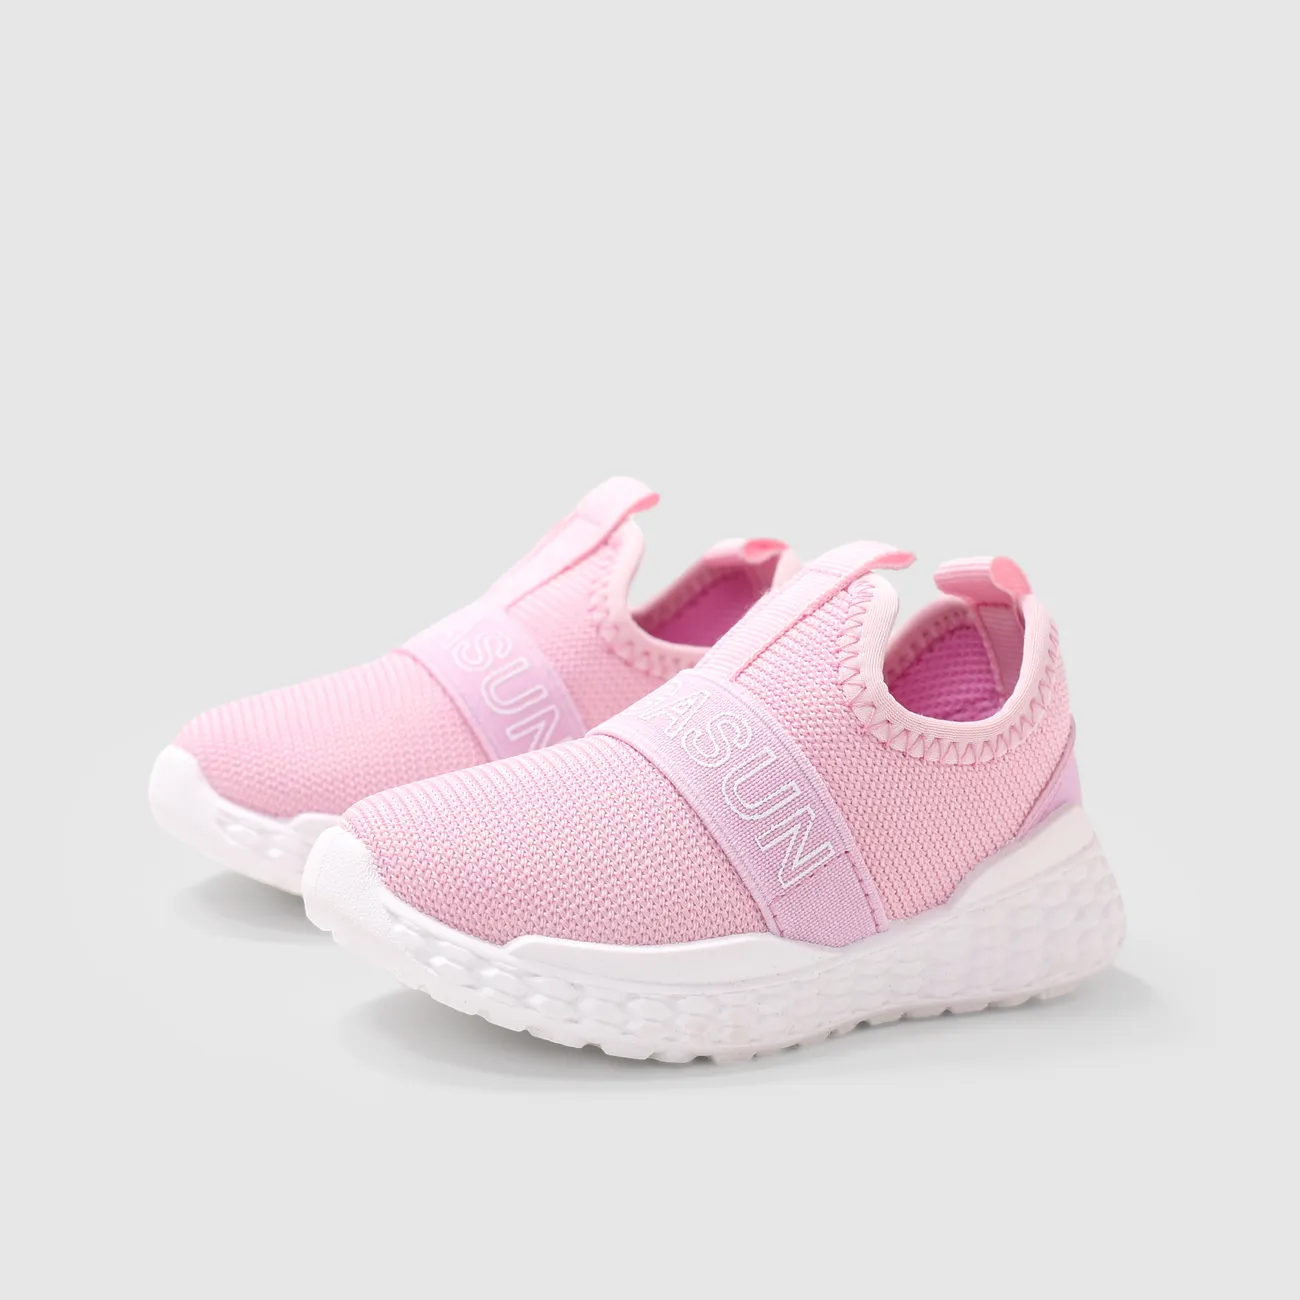 Toddler/Kids Girl Sporty Knitted Sports Shoes Pink big image 1